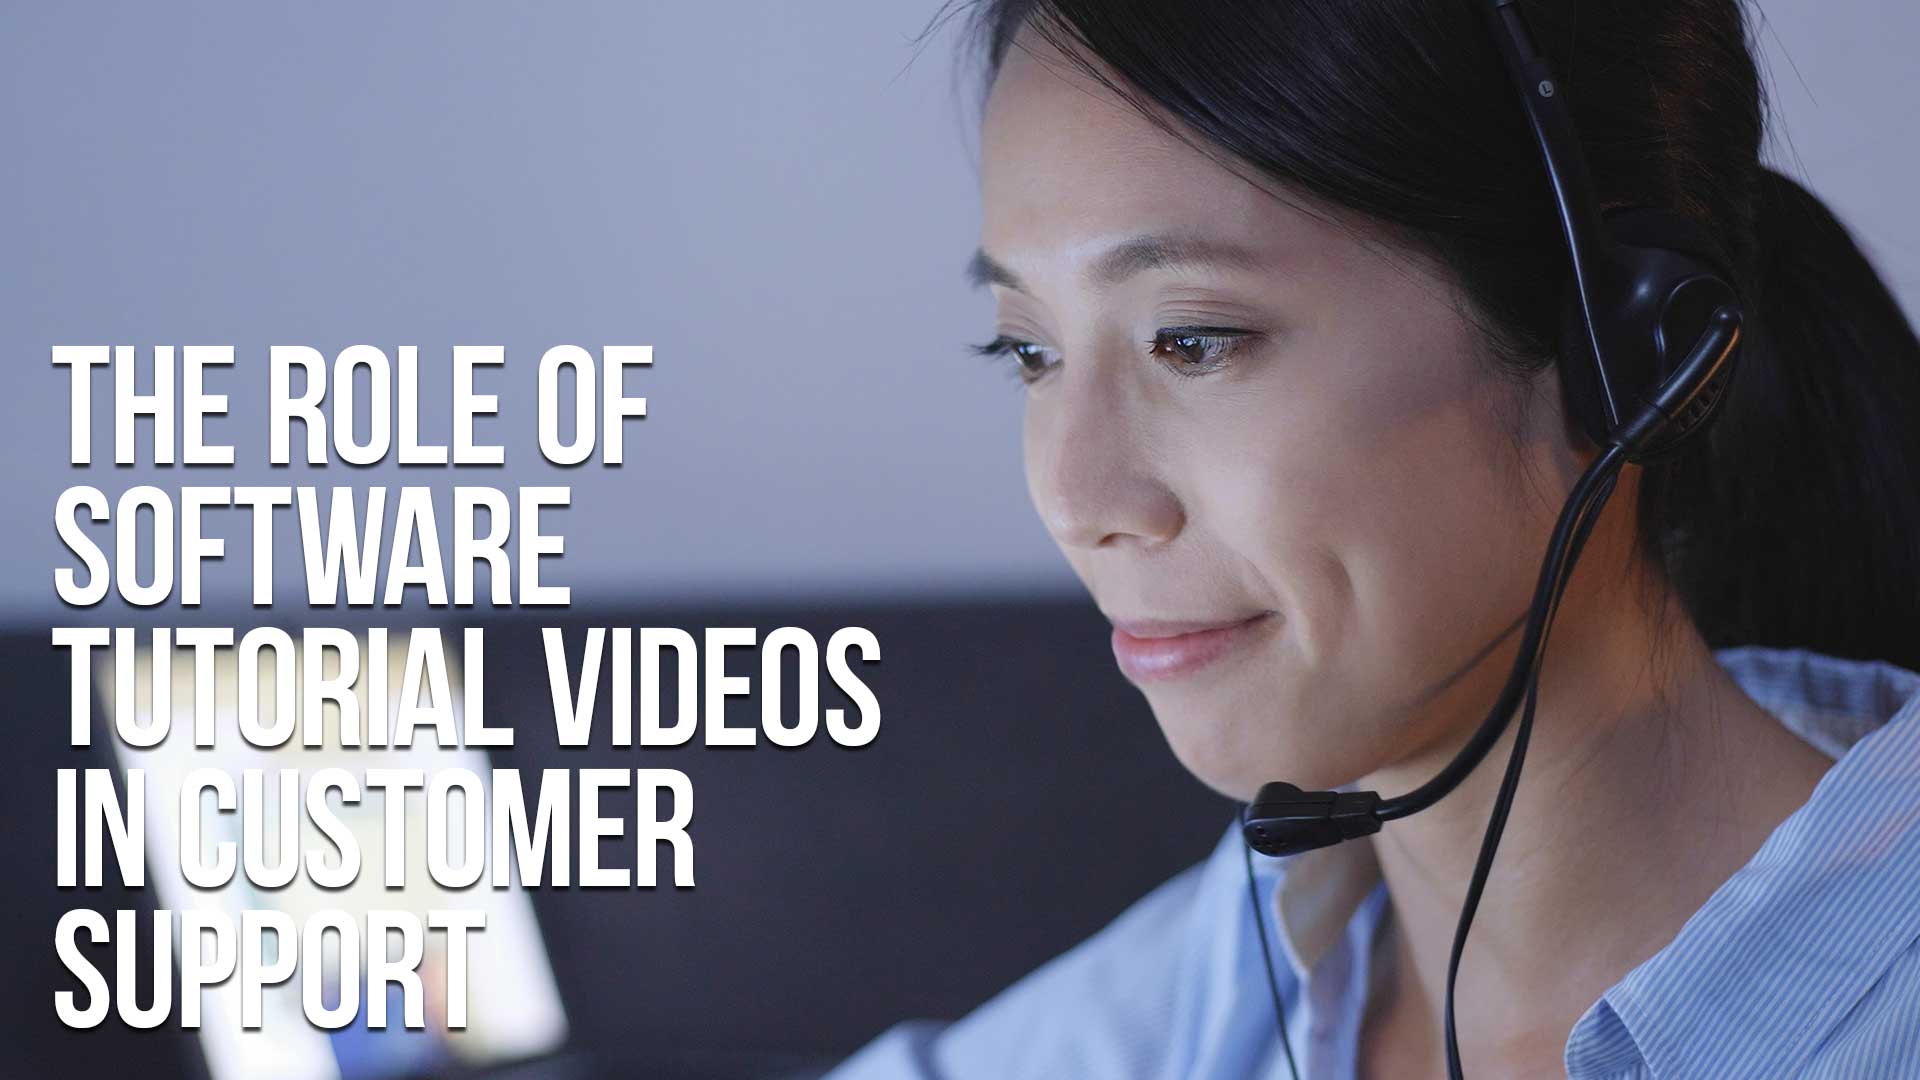 The Role of Software Tutorial Videos in Customer Support